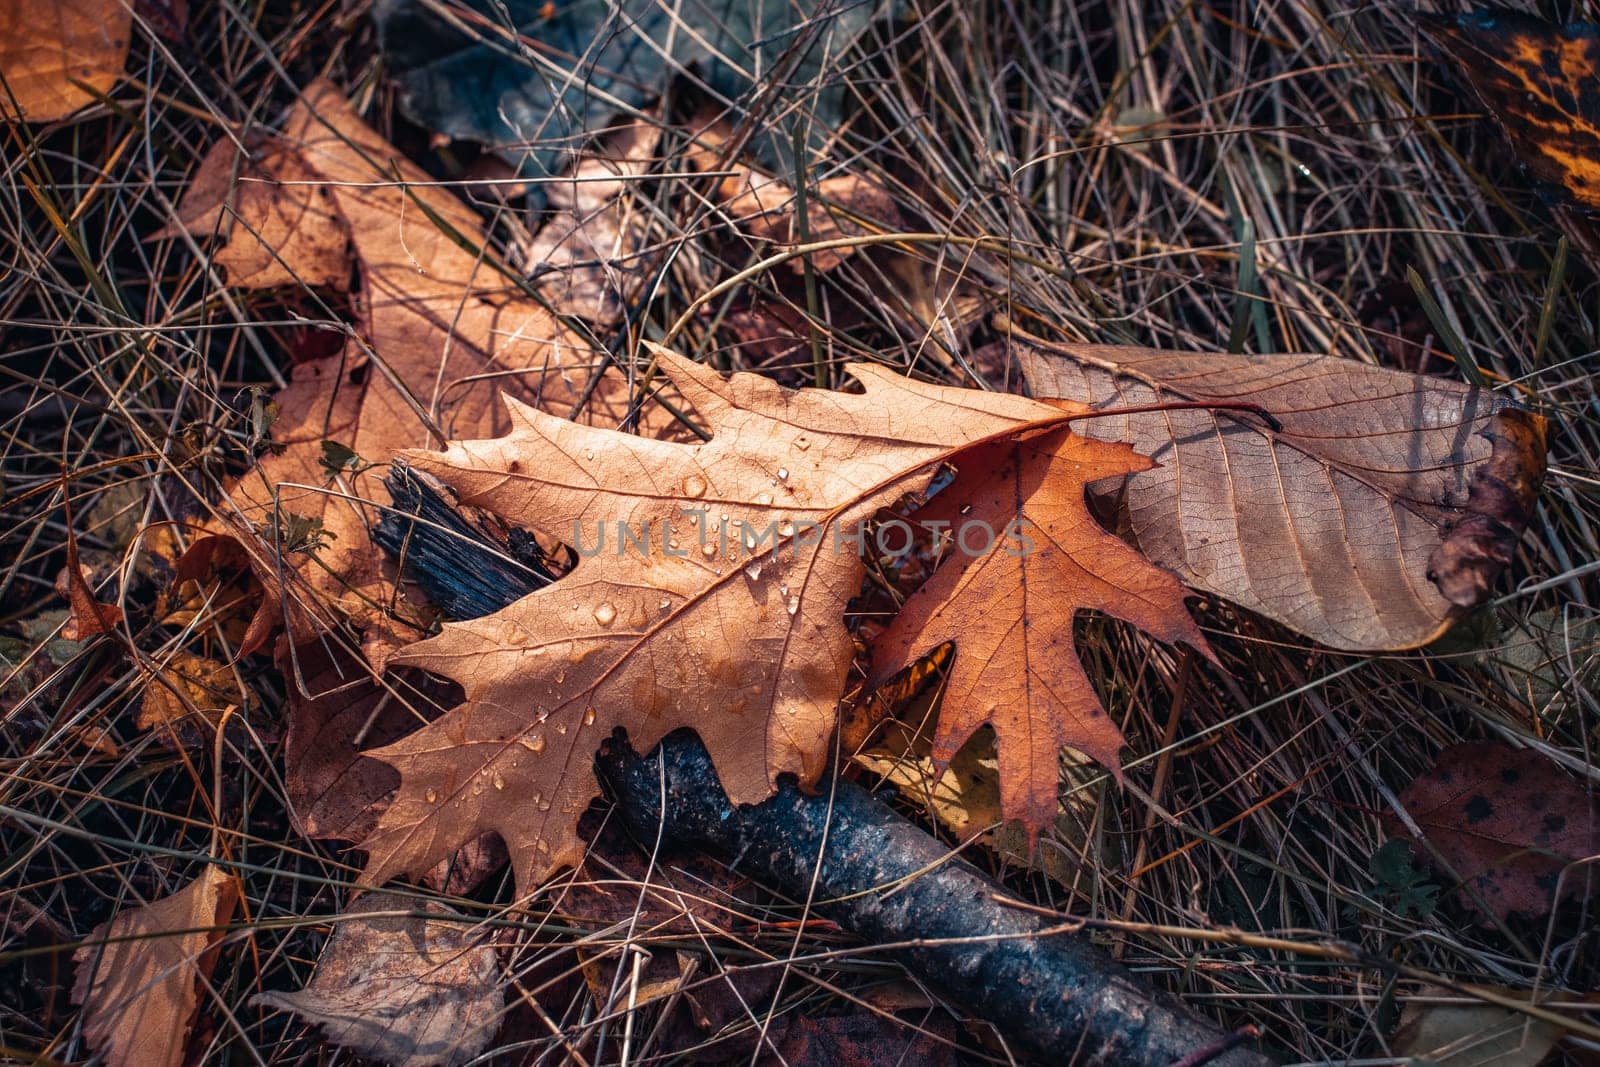 Autumn oak leaves on grass concept photo. Autumnal colorful background. Bright foliage with dew on ground. October landscape. November nature. Fallen foliage. Autumn park.